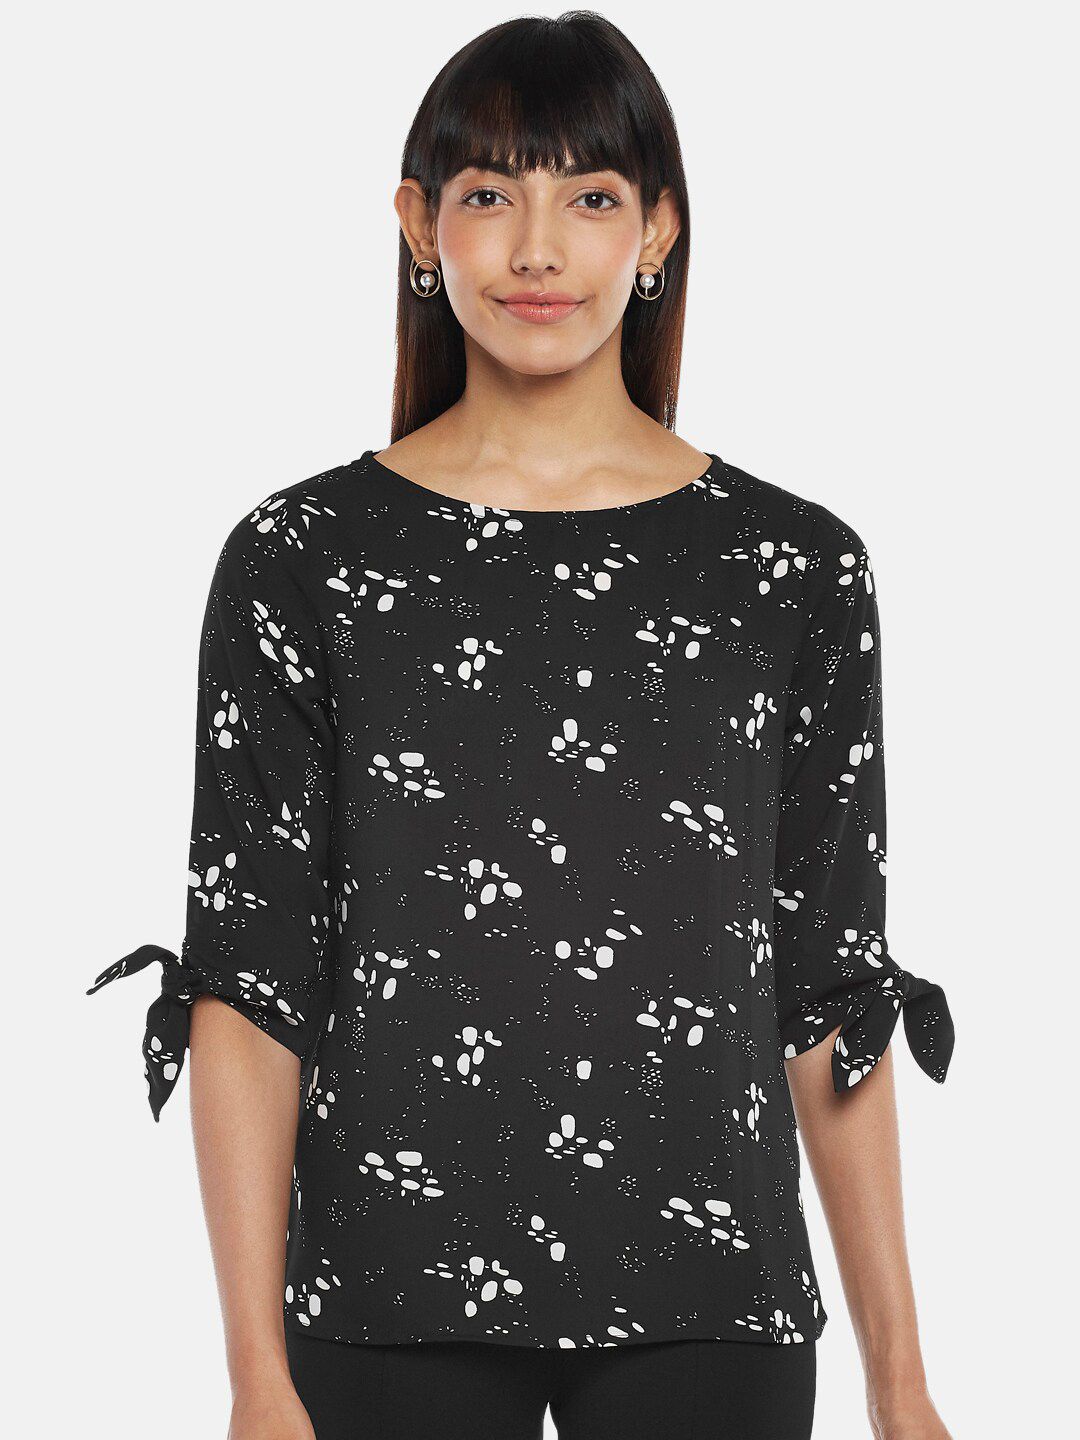 Annabelle by Pantaloons Women Black Floral Print Top Price in India